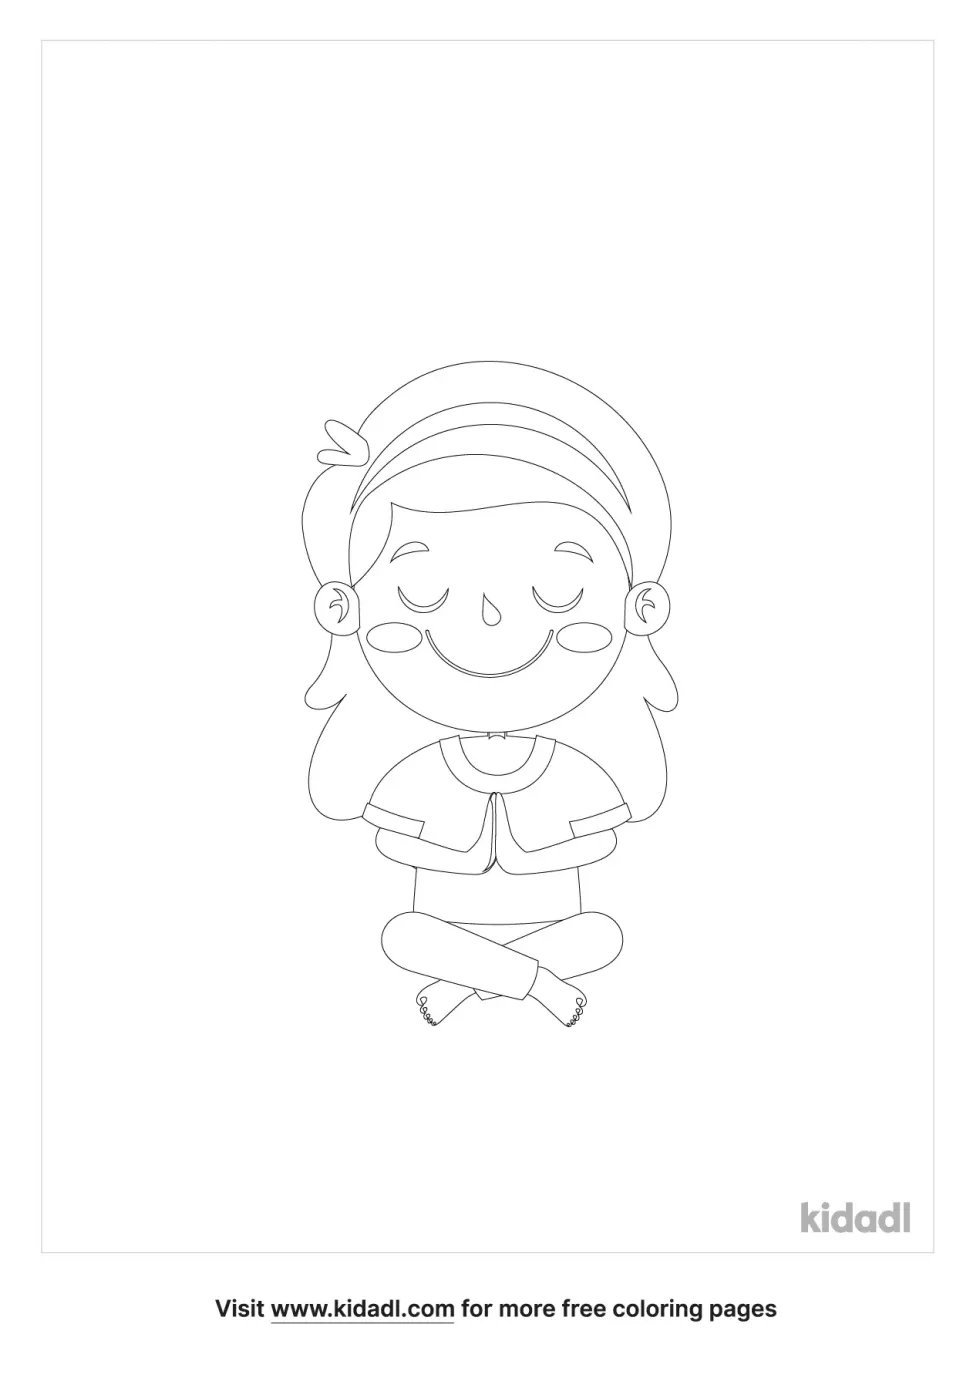 Child Meditating Coloring Page